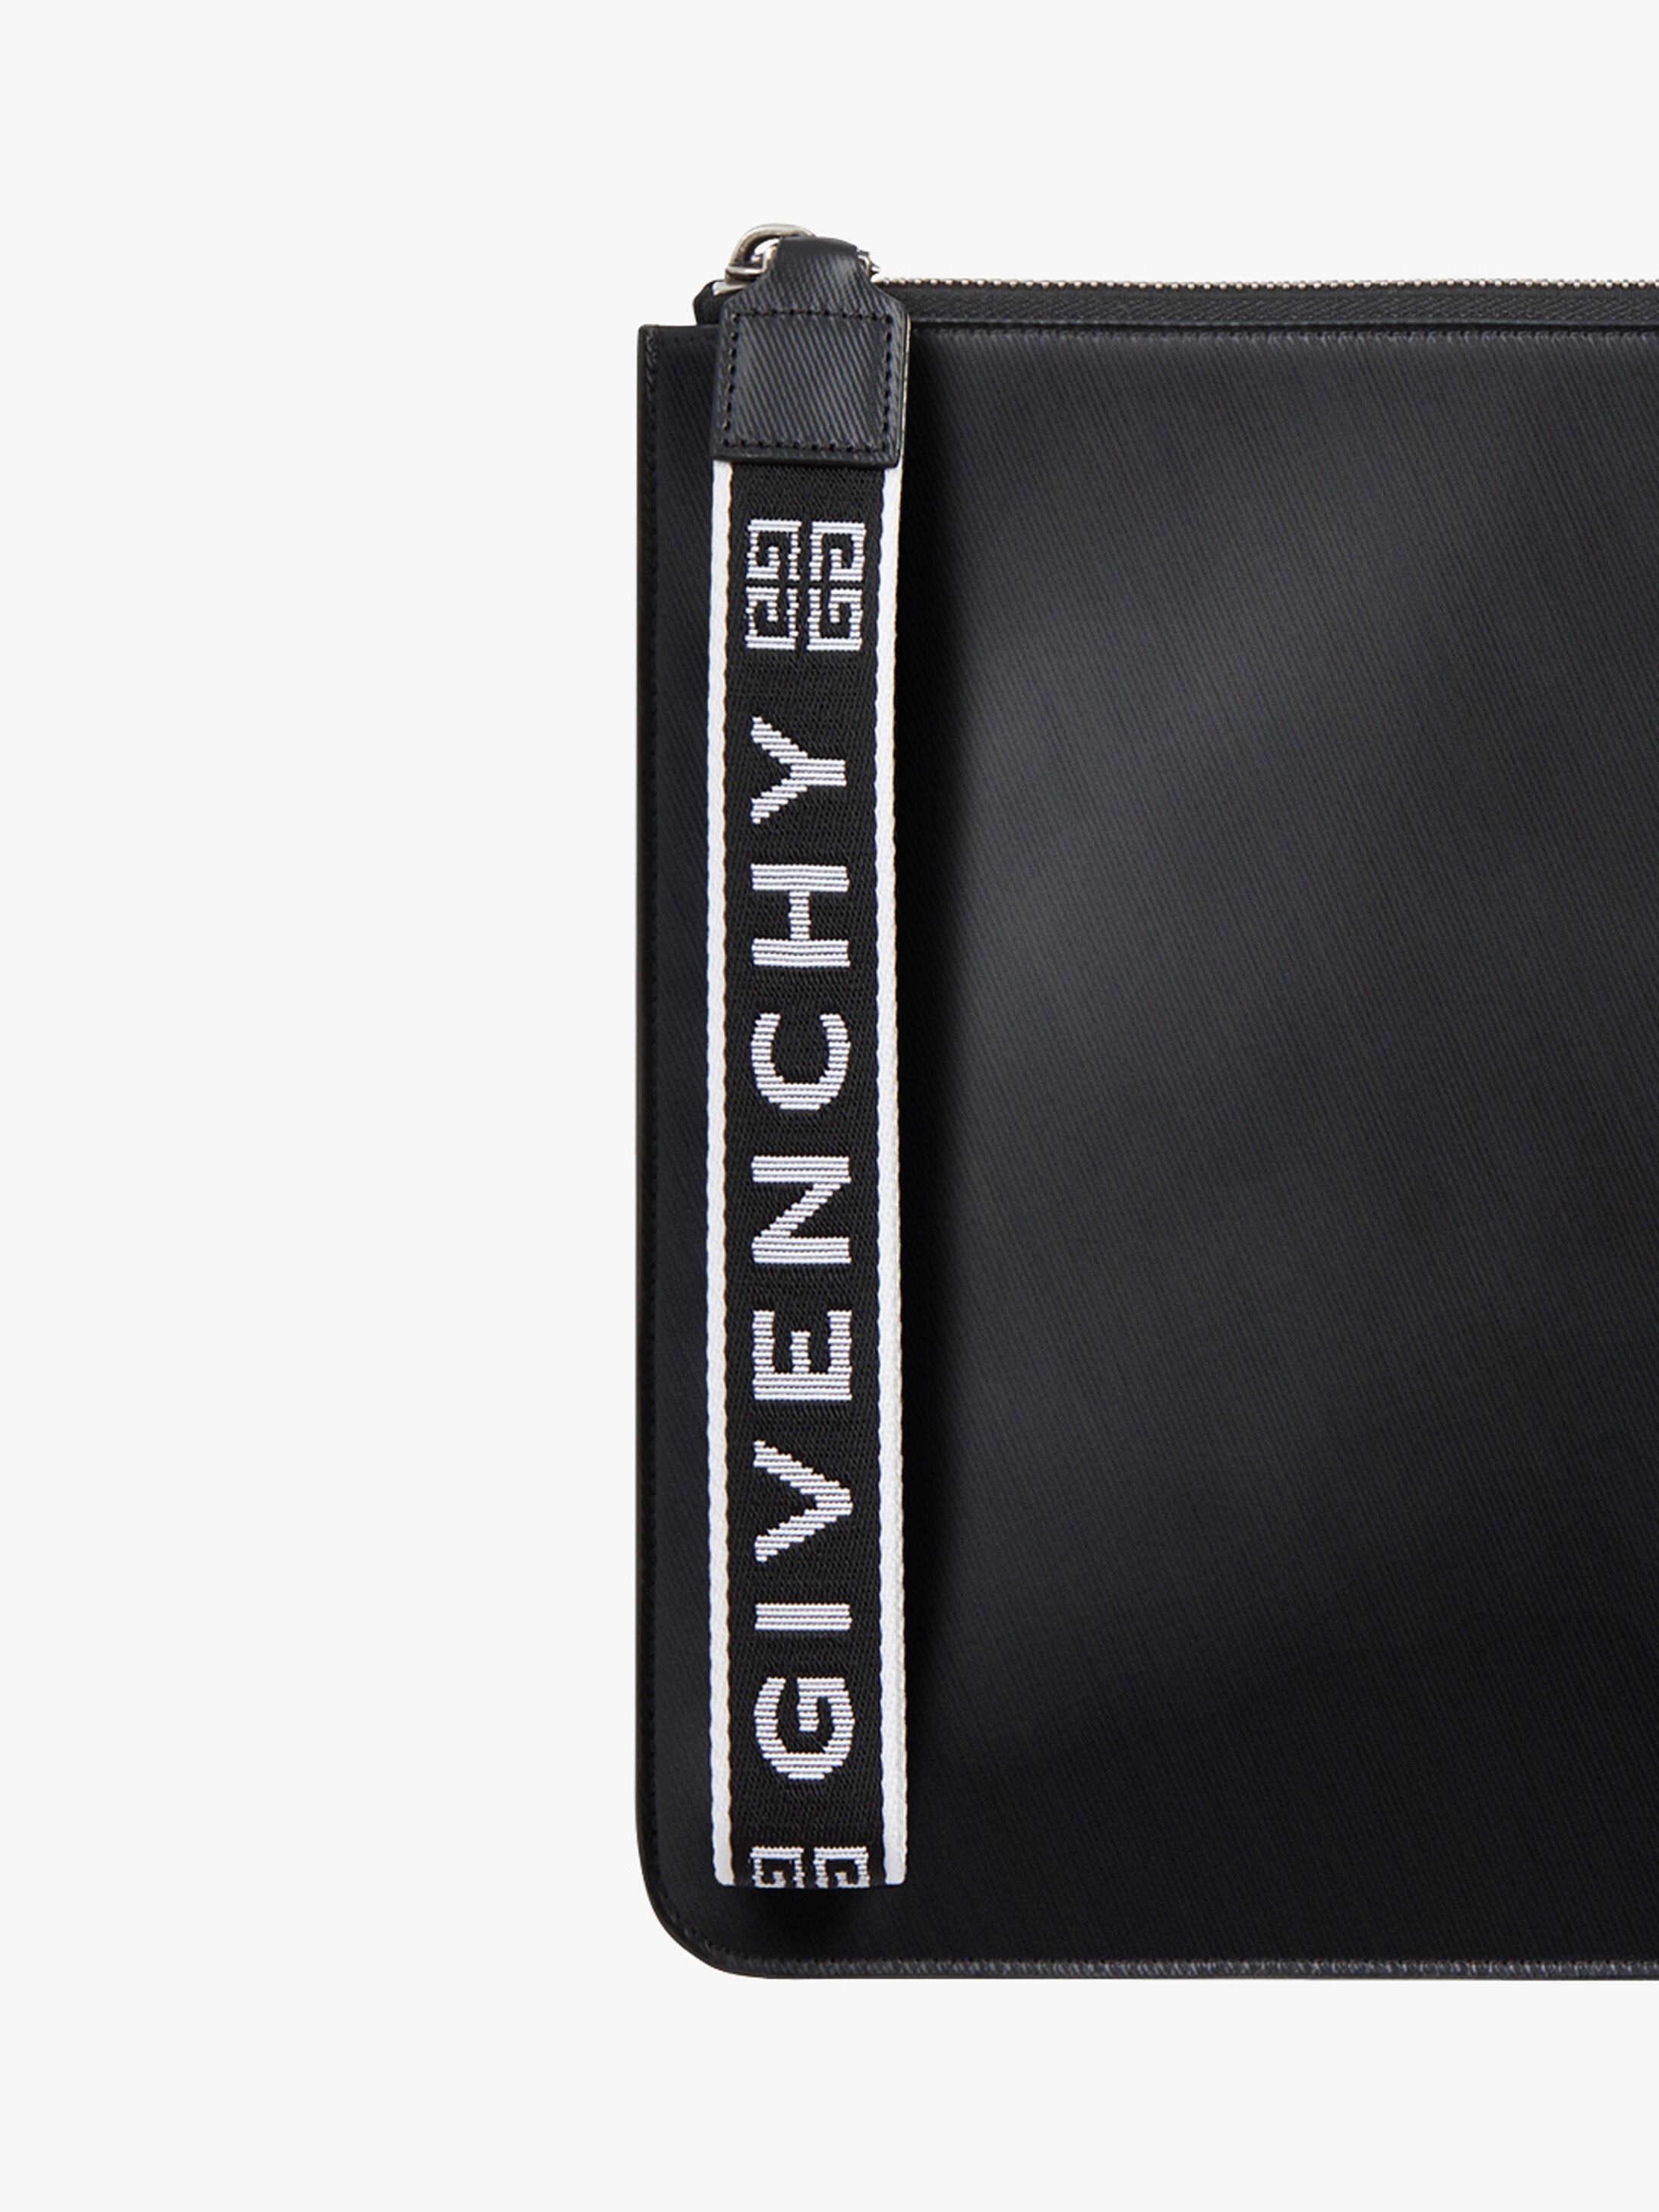 GIVENCHY 4G wrist strap large pouch - 4